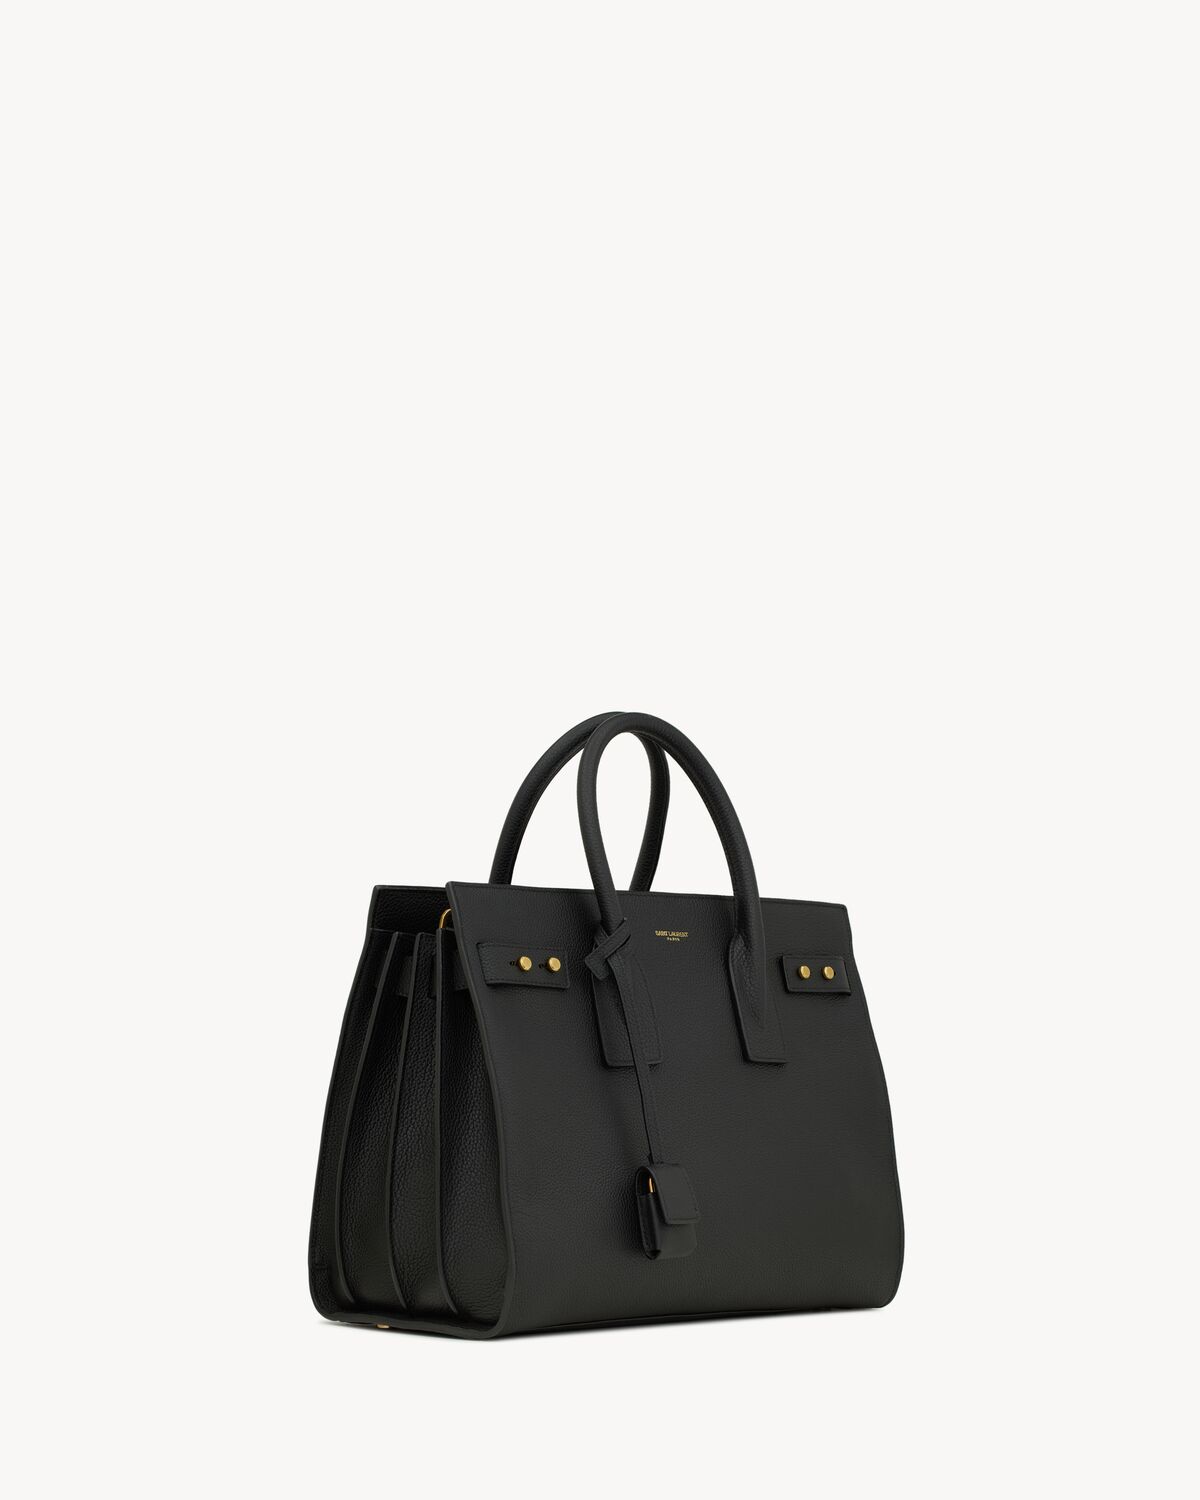 SAC DE JOUR SMALL IN SUPPLE GRAINED LEATHER